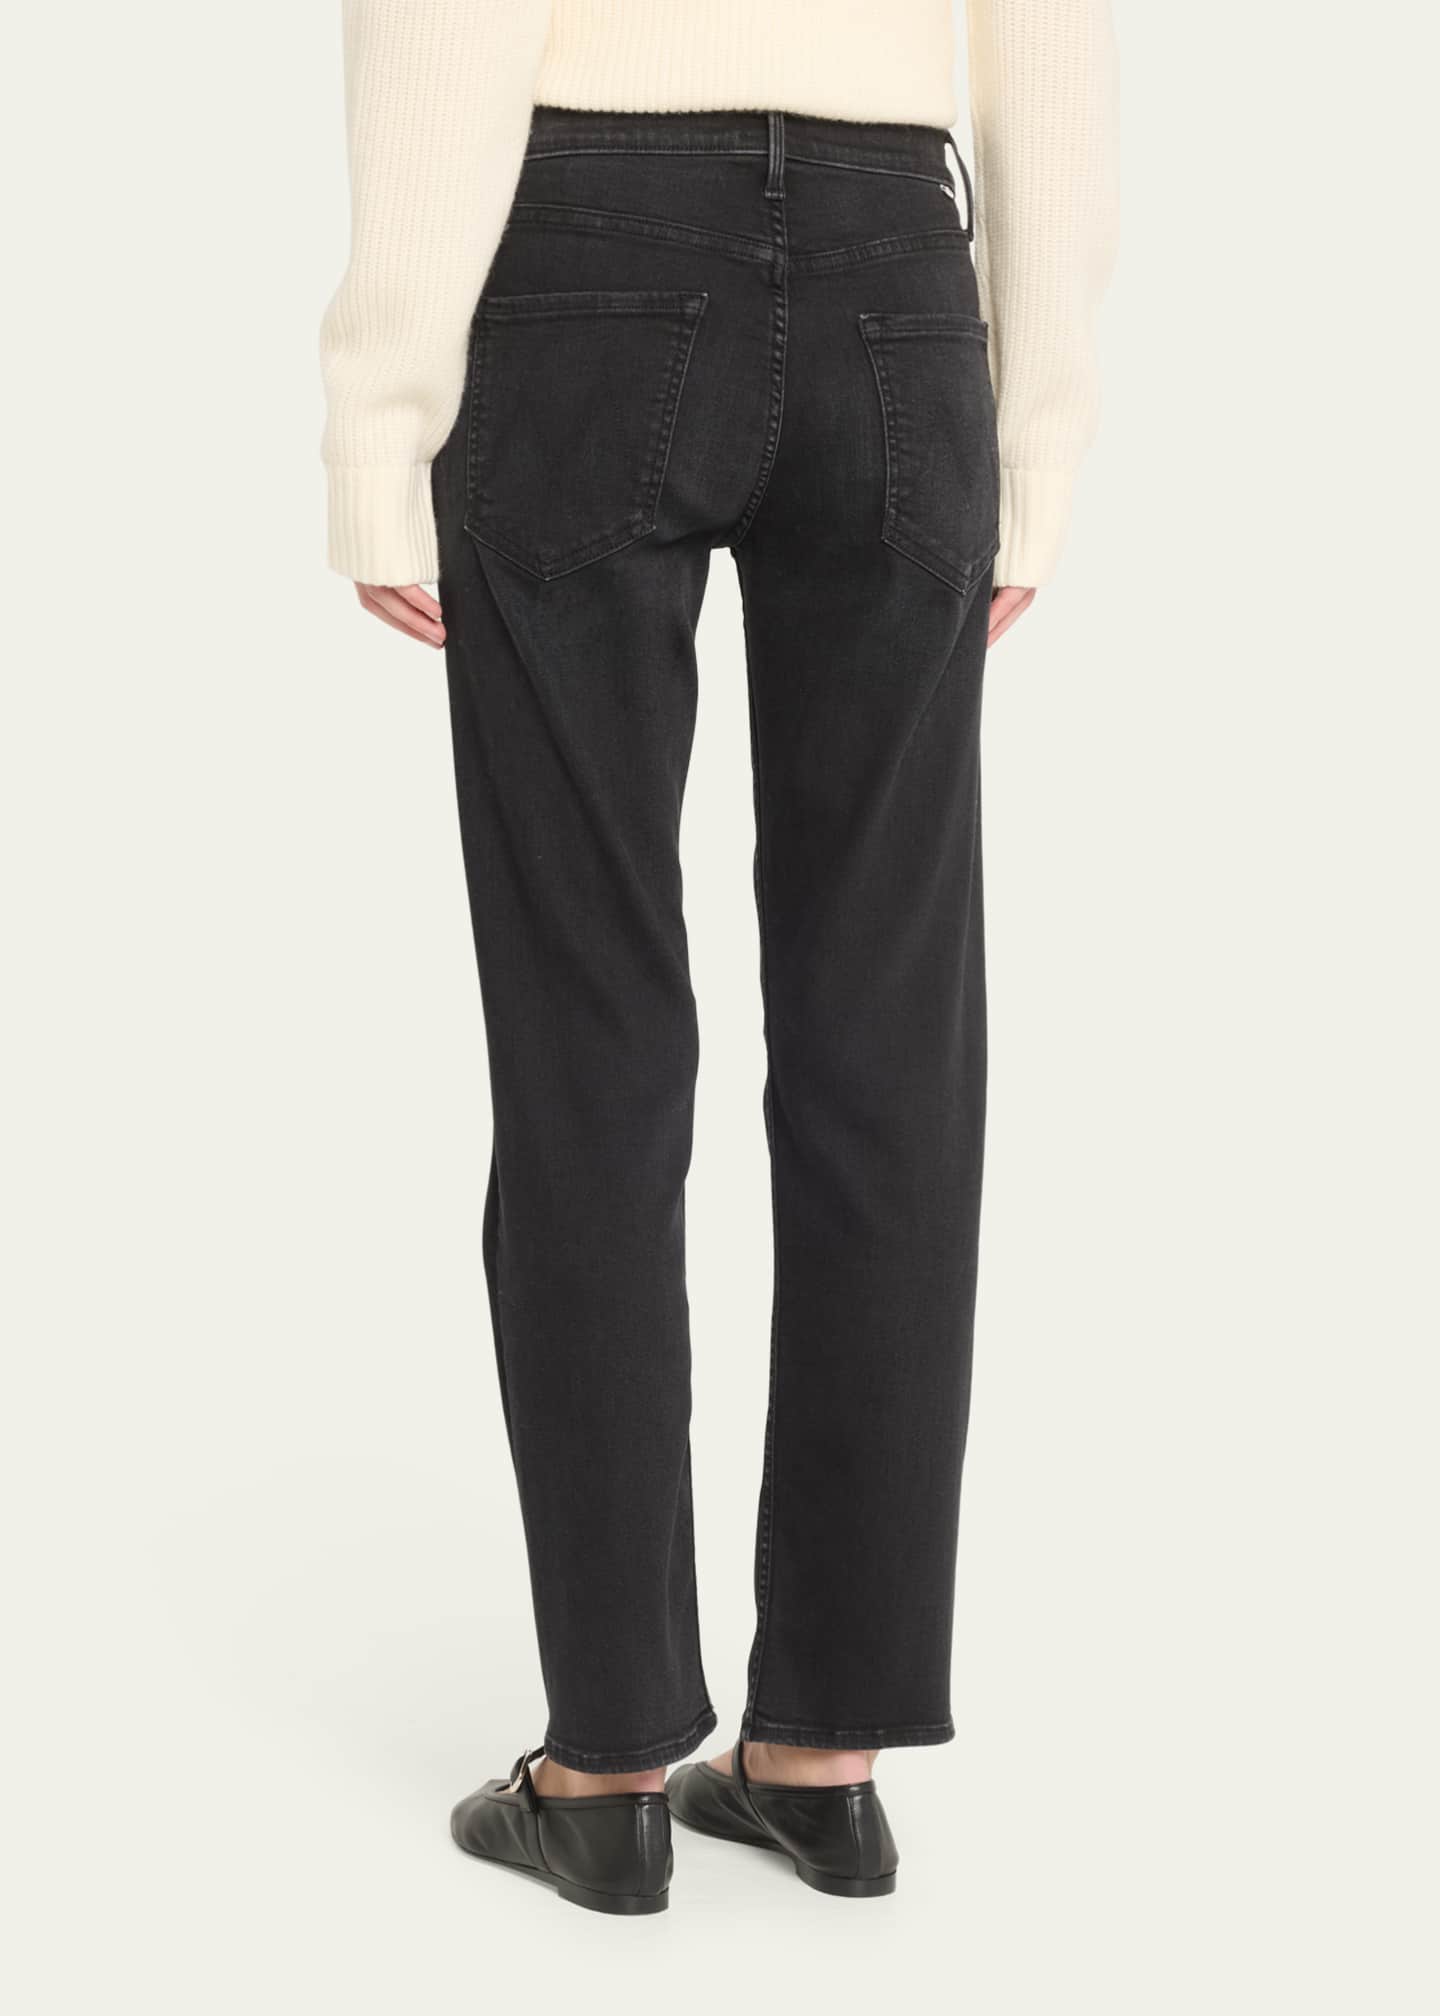 MOTHER The Smarty Pants Hover Jeans - Bergdorf Goodman